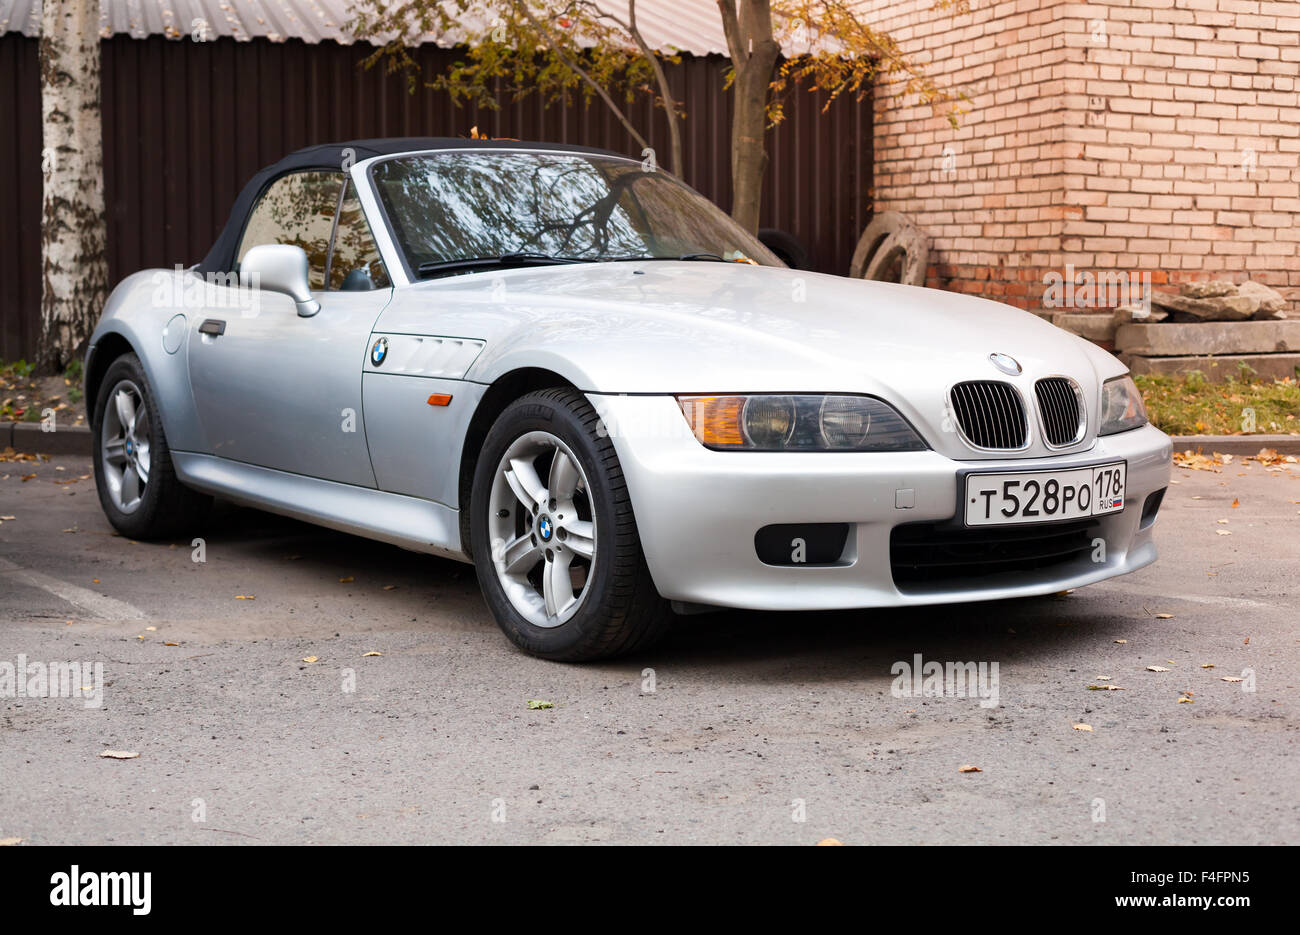 Saint-Petersburg, Russia - October 17, 2015: Silver gray BMW Z3 car with convertible roof stands parked on the roadside Stock Photo